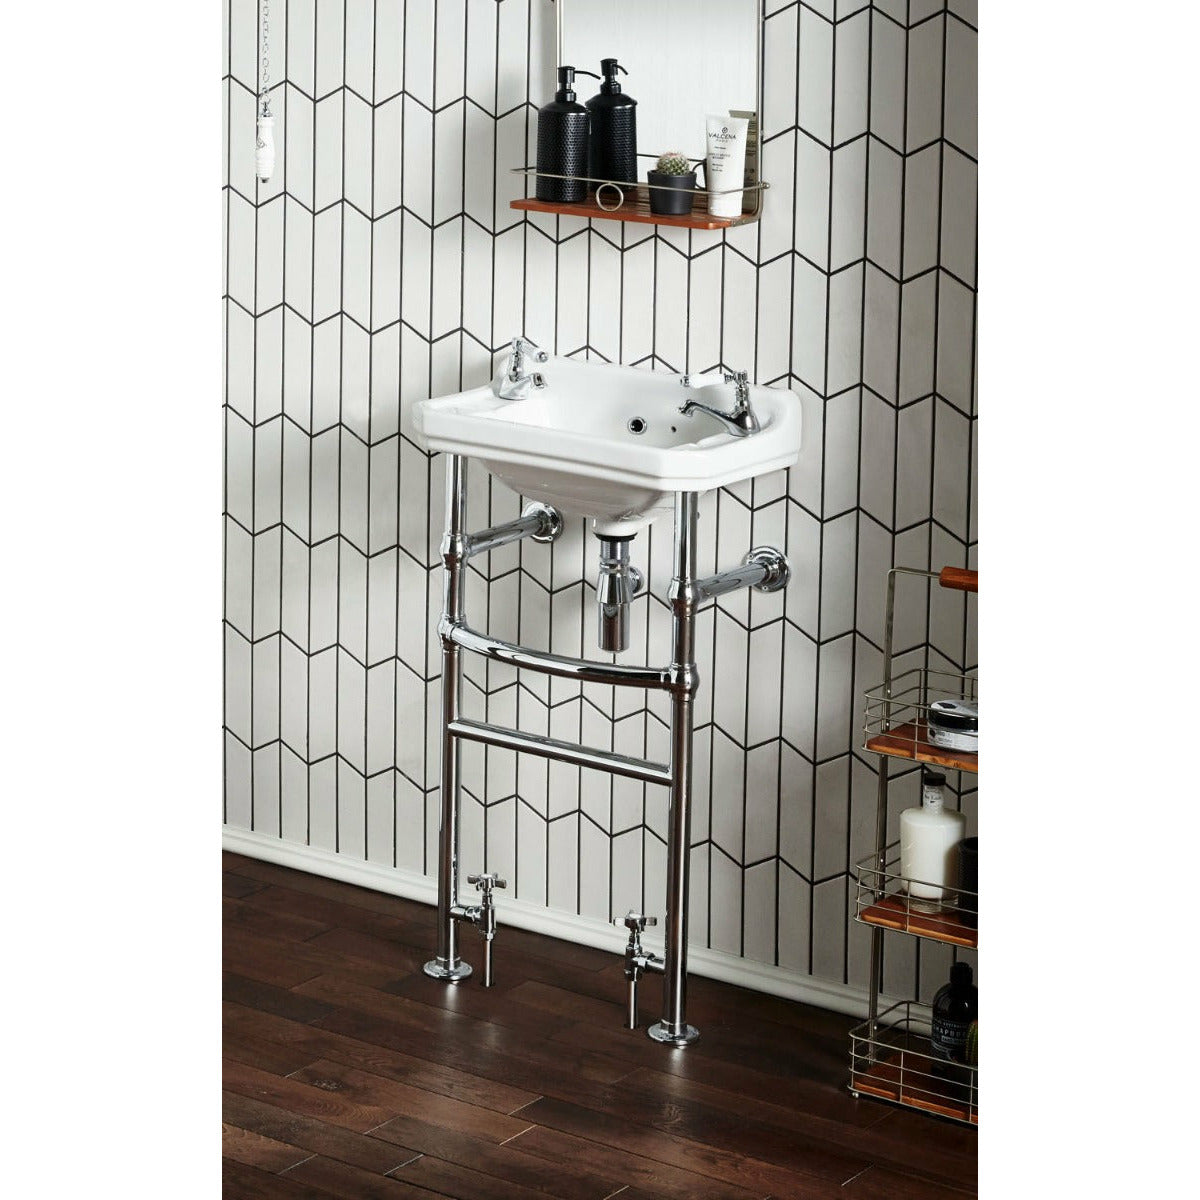 Frontline White/Chrome Holborn Heated Washstand with Basin and Towel Rail - Letta London - 